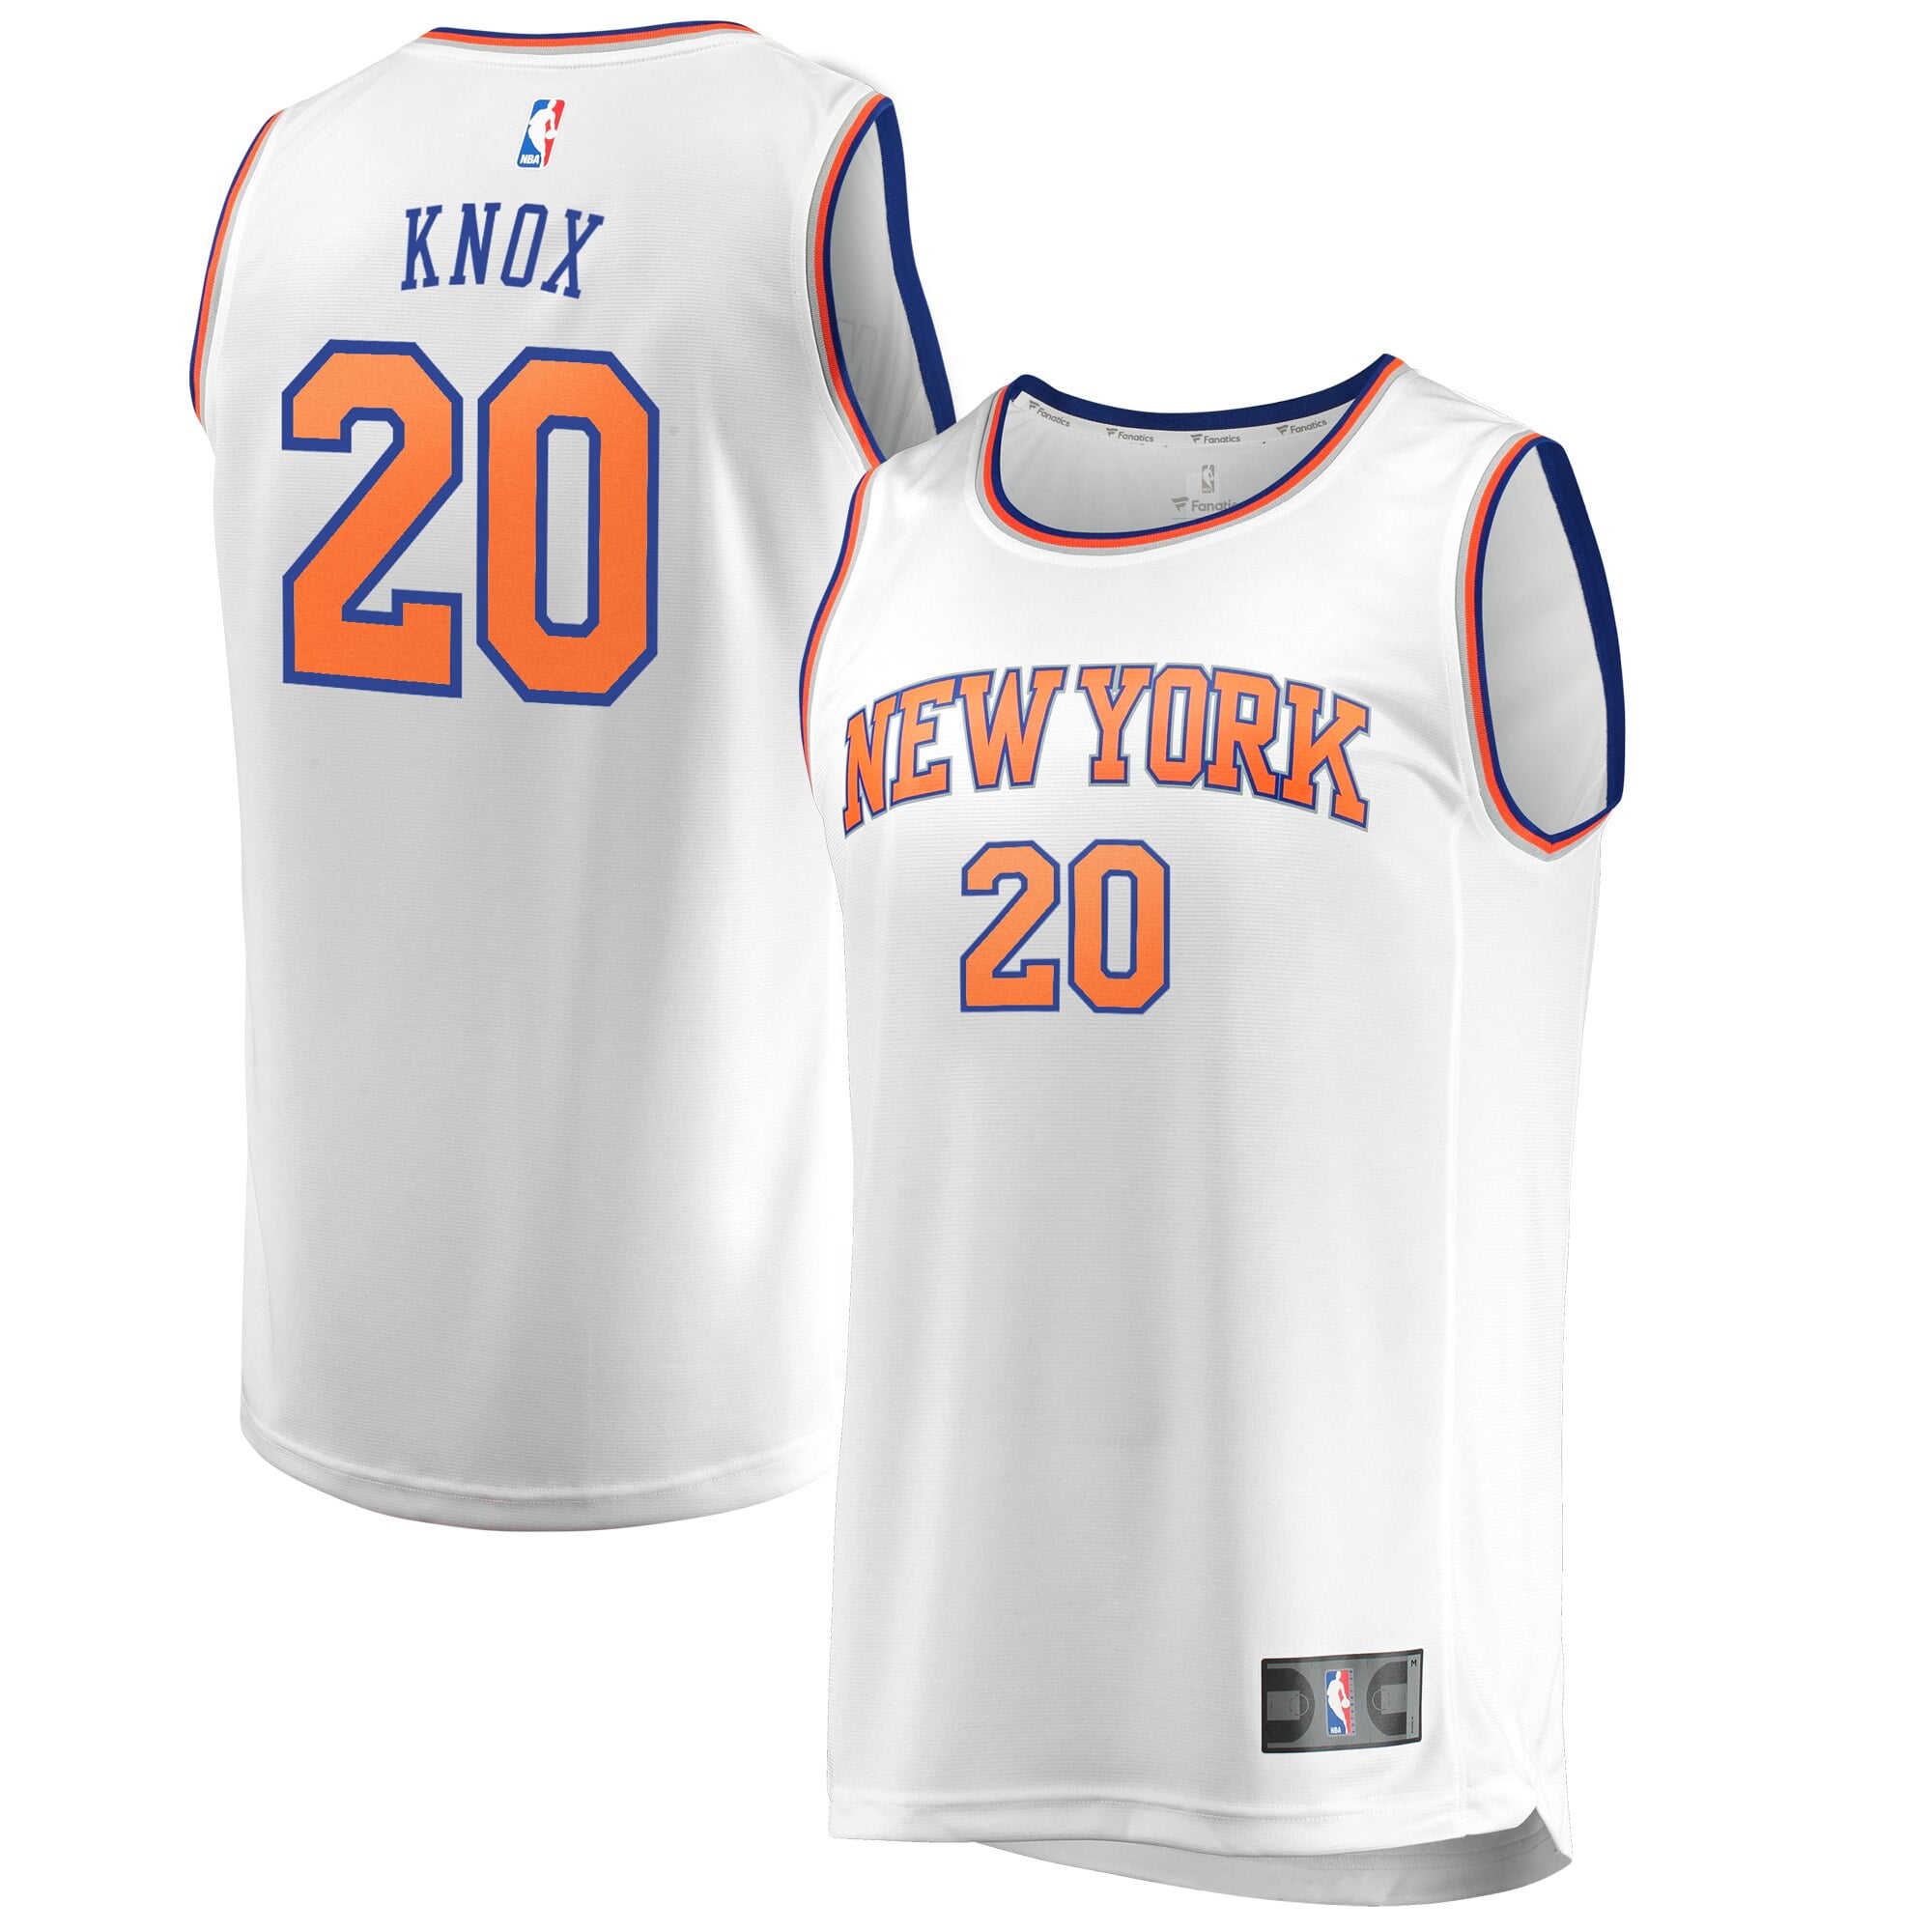 kevin knox jersey white